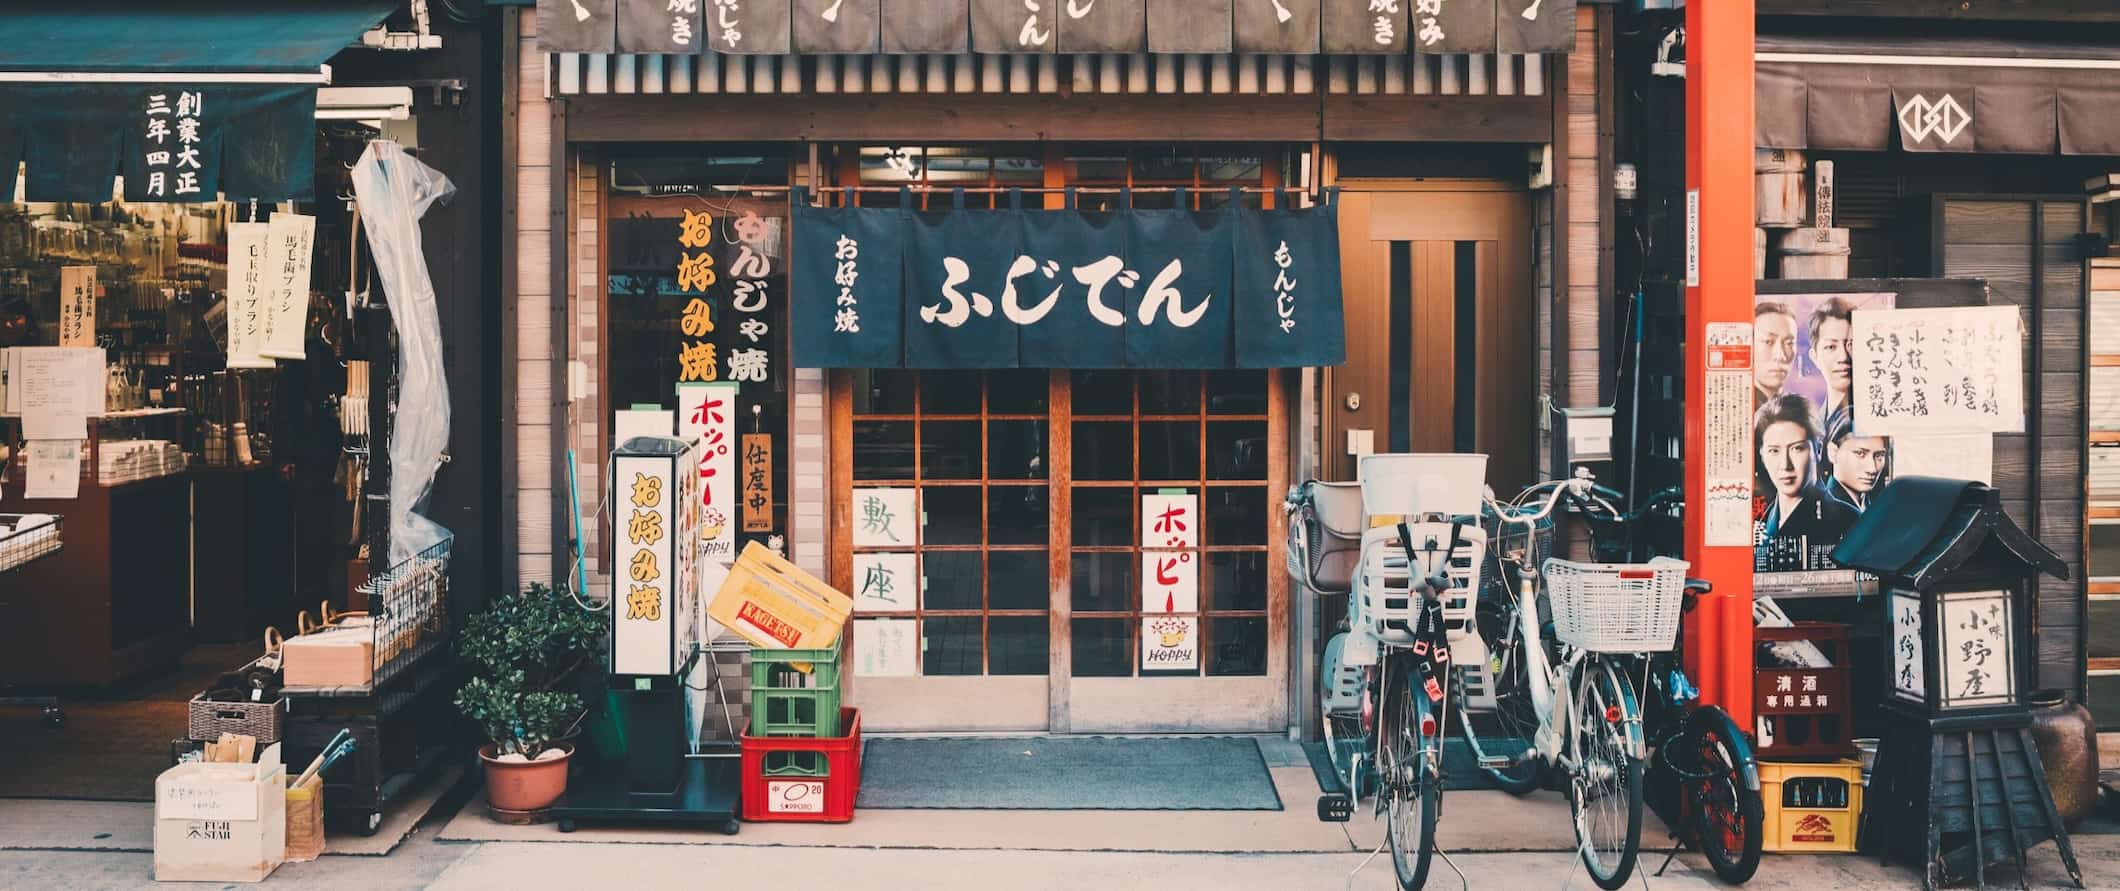 A small shop on a quiet street in Japan